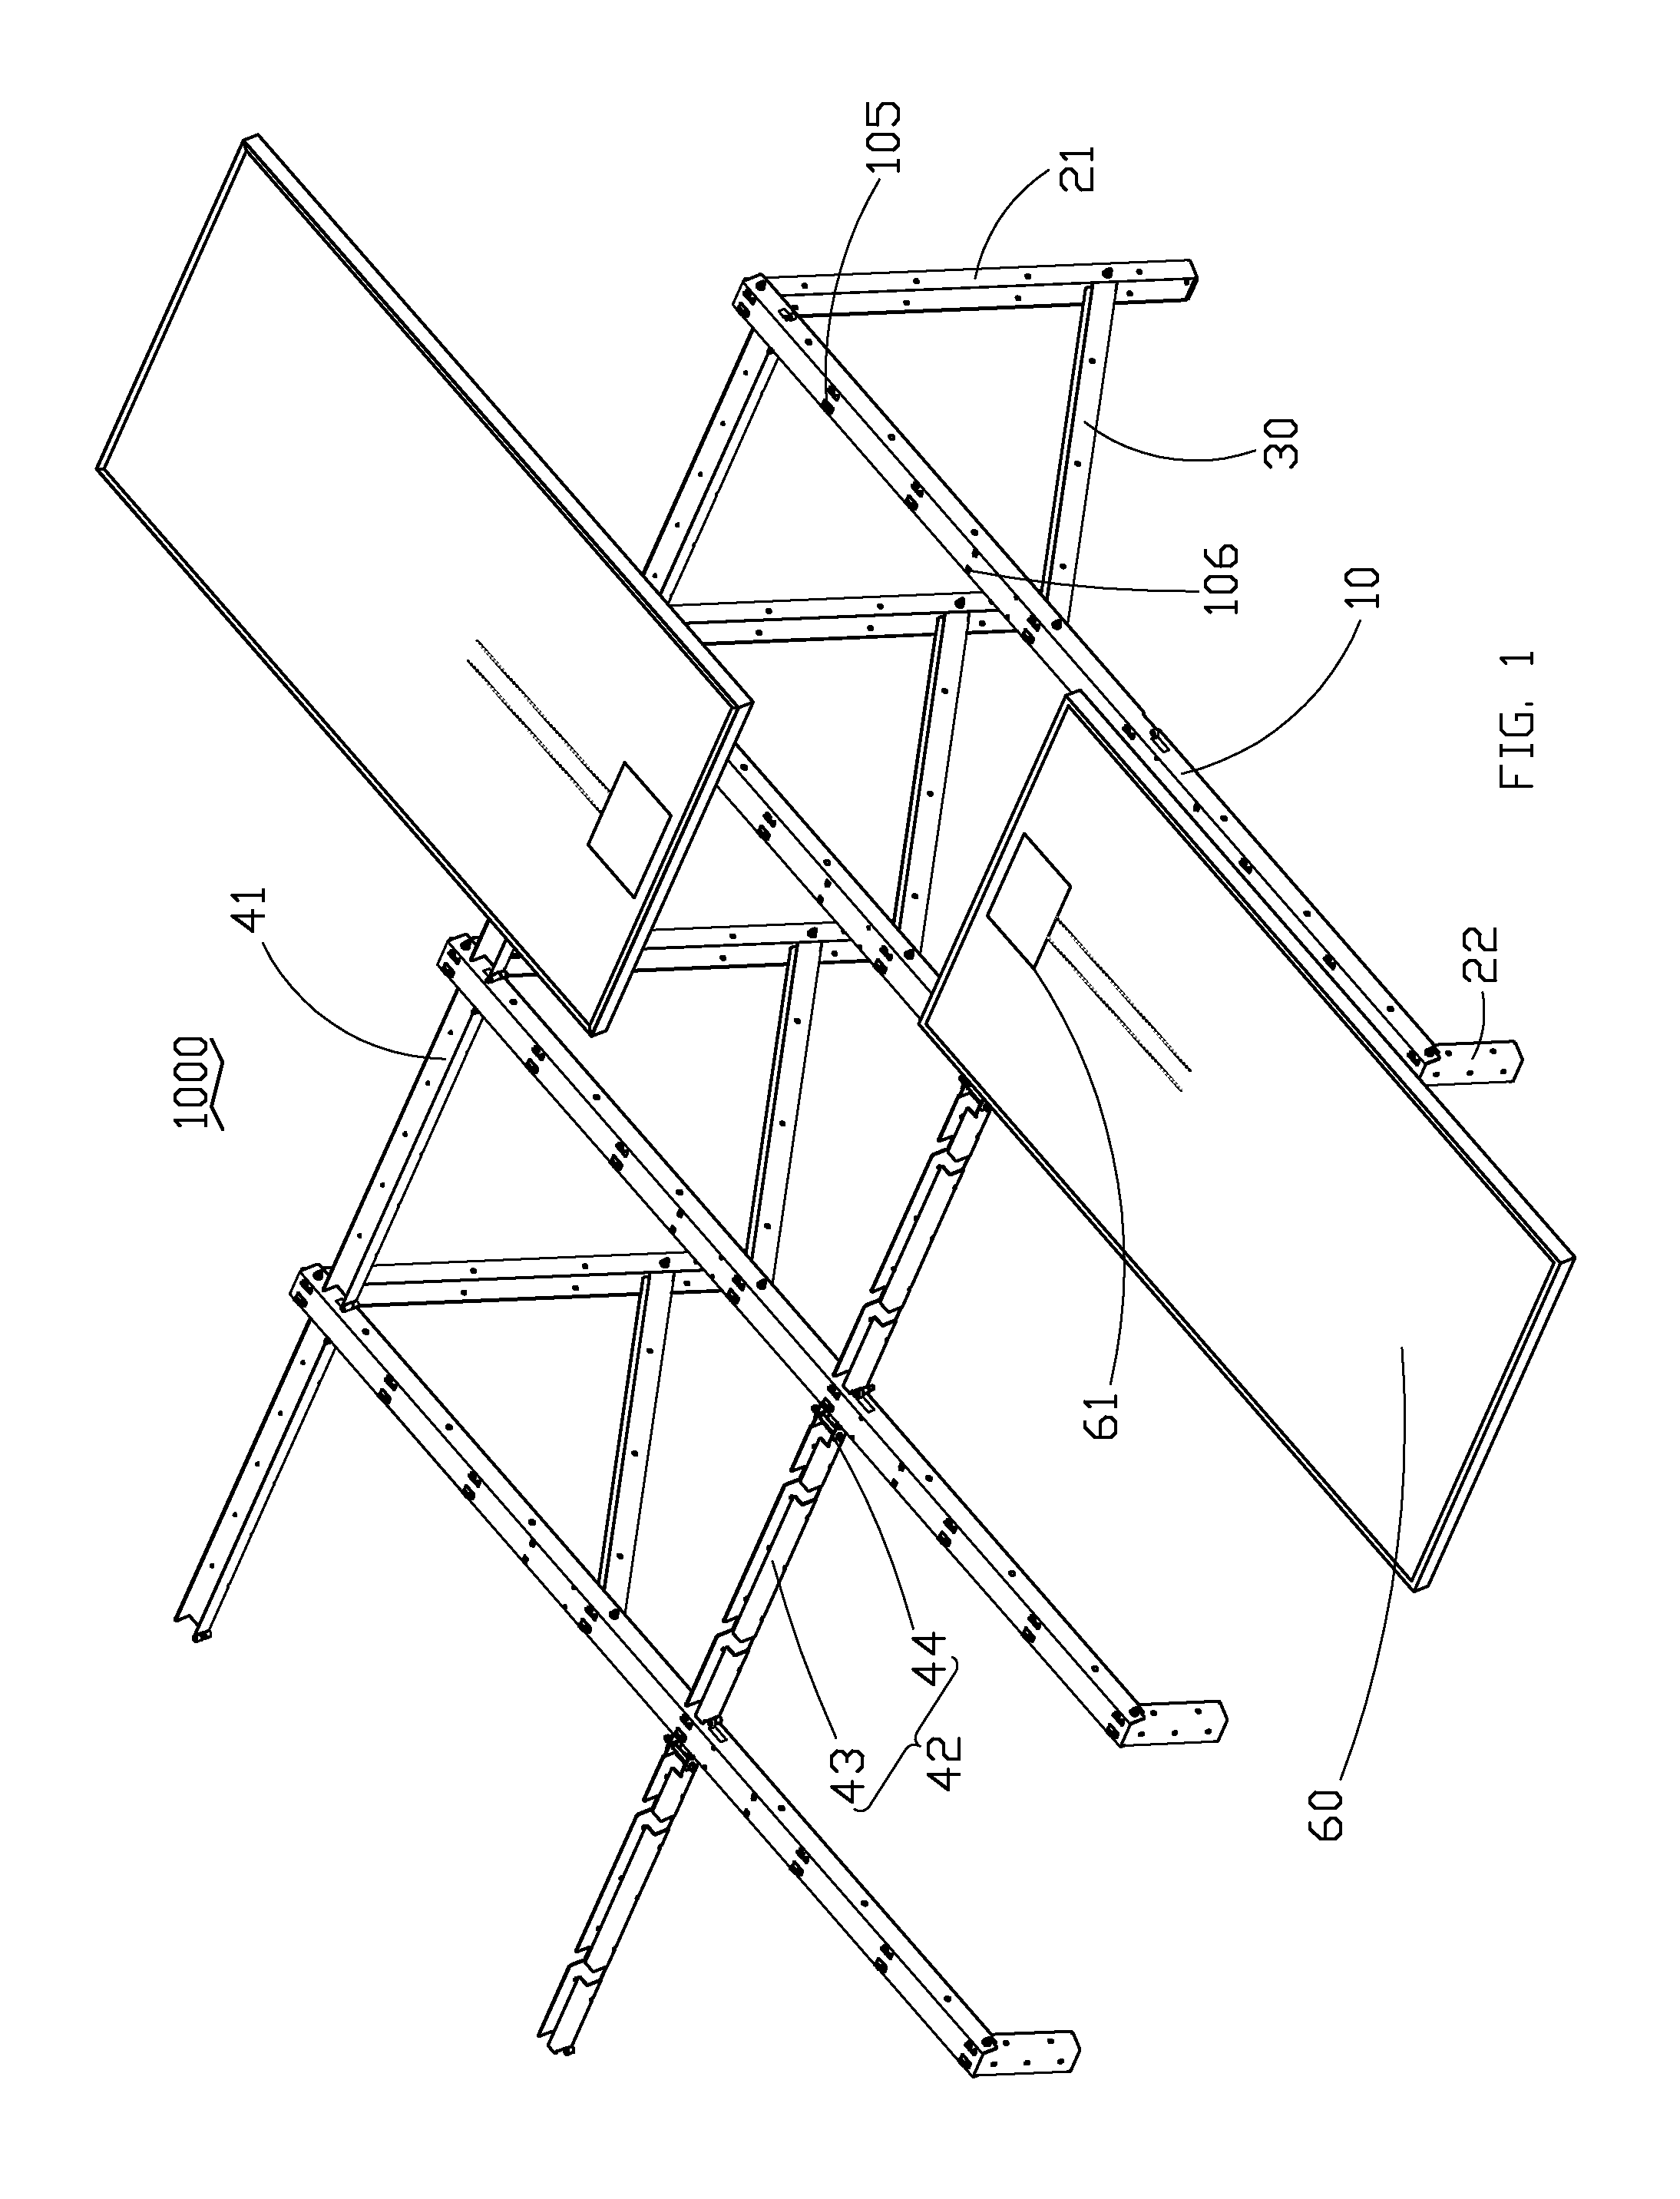 Support assembly for photovoltaic panels